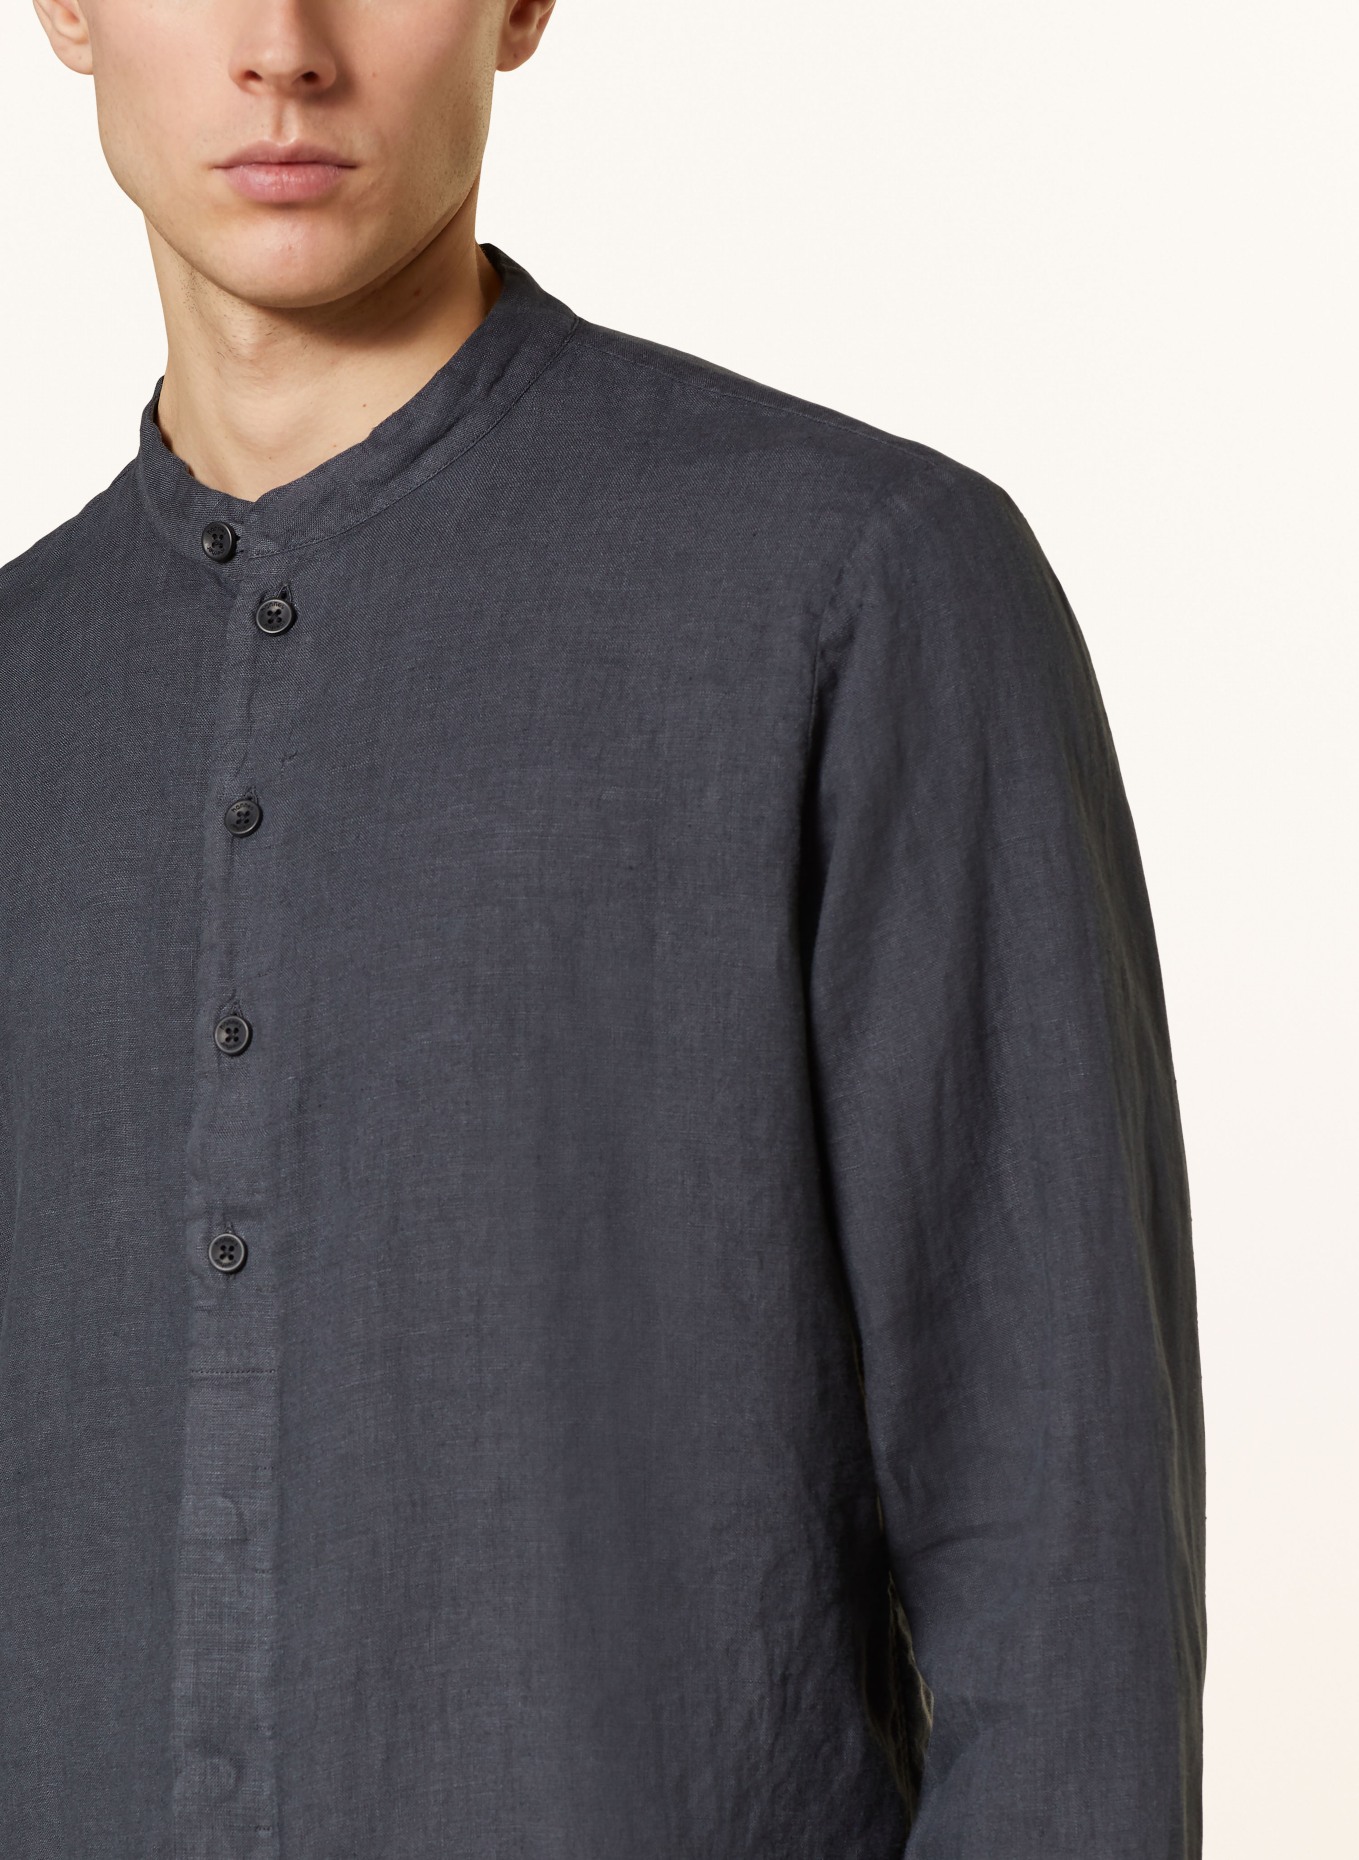 hannes roether Linen shirt TU29BS regular fit with stand-up collar, Color: DARK GRAY (Image 4)